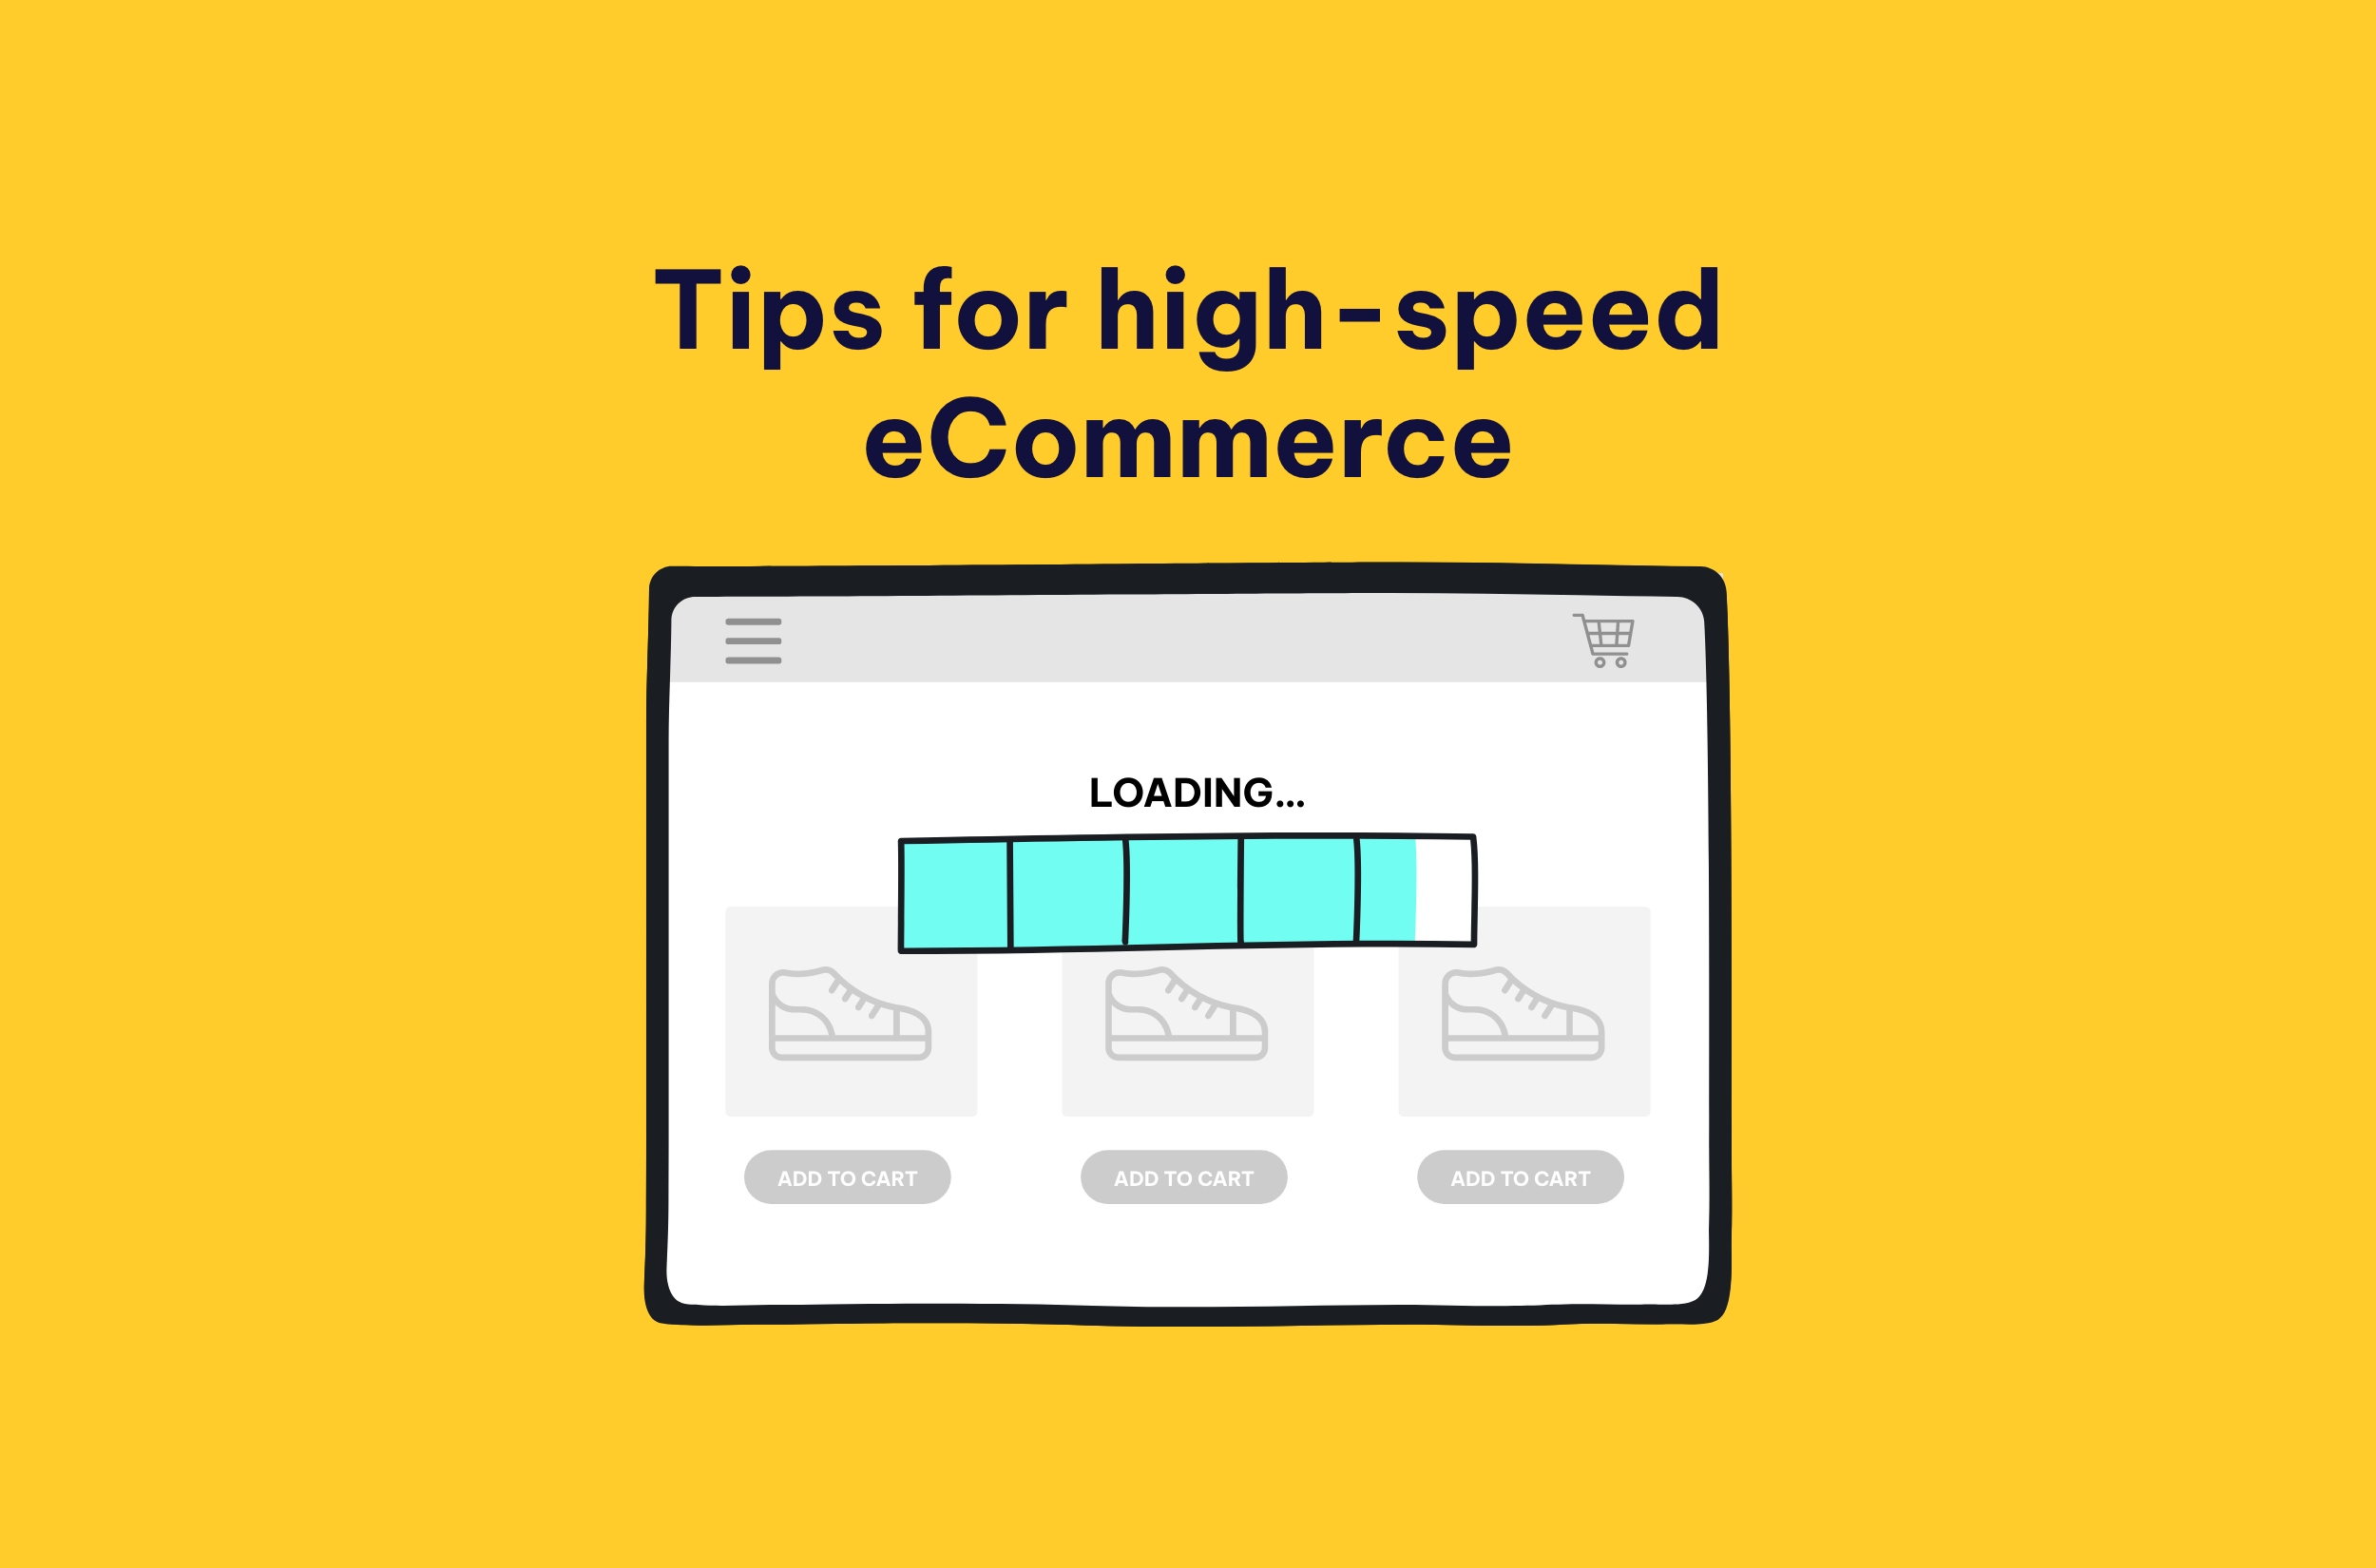 Tips for high-speed eCommerce